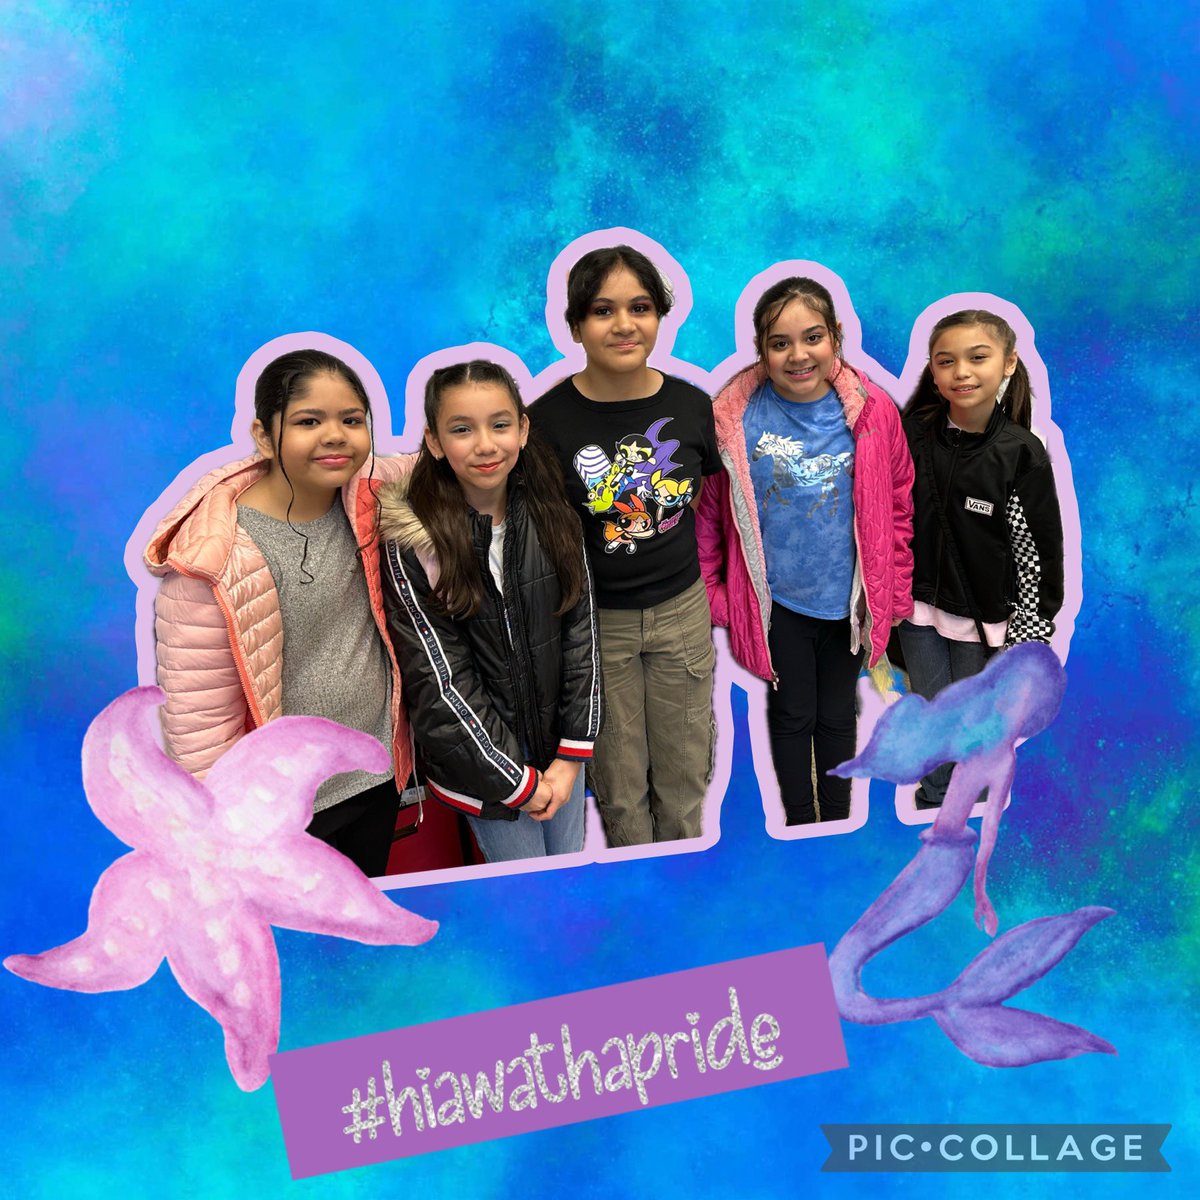 And they are off for dress rehearsal day of The Little Mermaid Jr! Can’t wait to watch on Friday!! @Mr_Kimmel  #hiawathapride #d100inspires